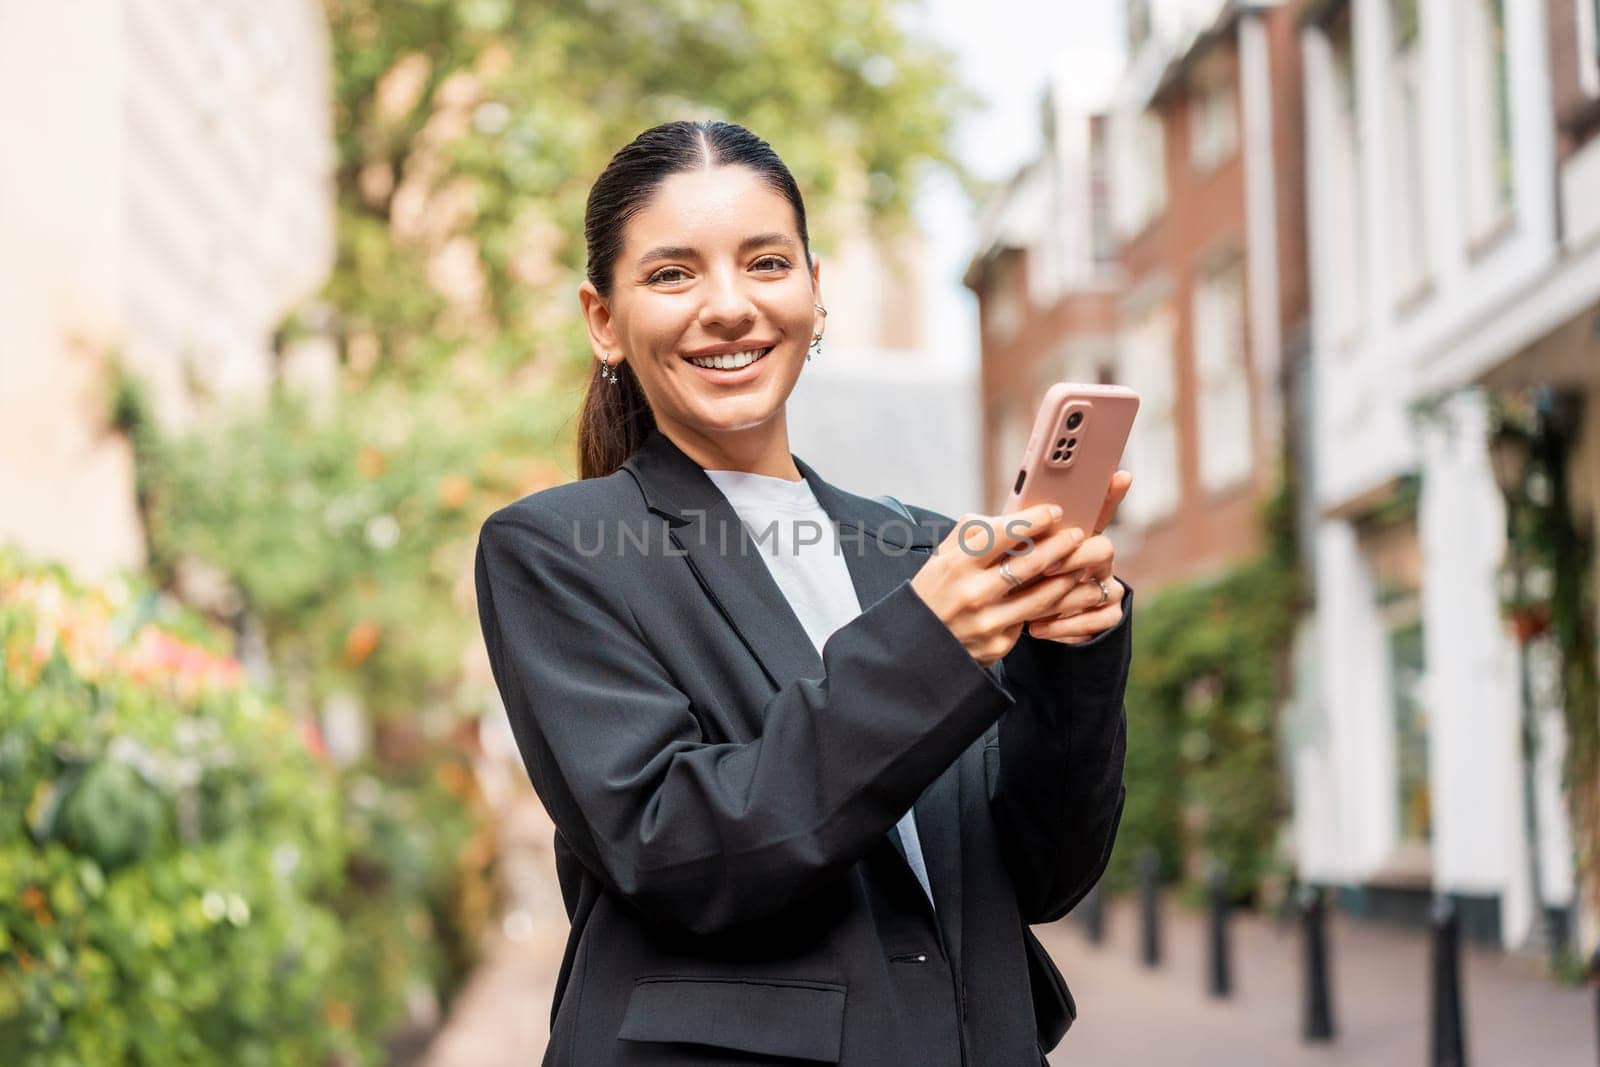 Beautiful confident Hispanic multiracial young businesswoman in black suit and white t-shirt holding a phone in the streets smiling to camera. New entrepreneur by AndreiDavid